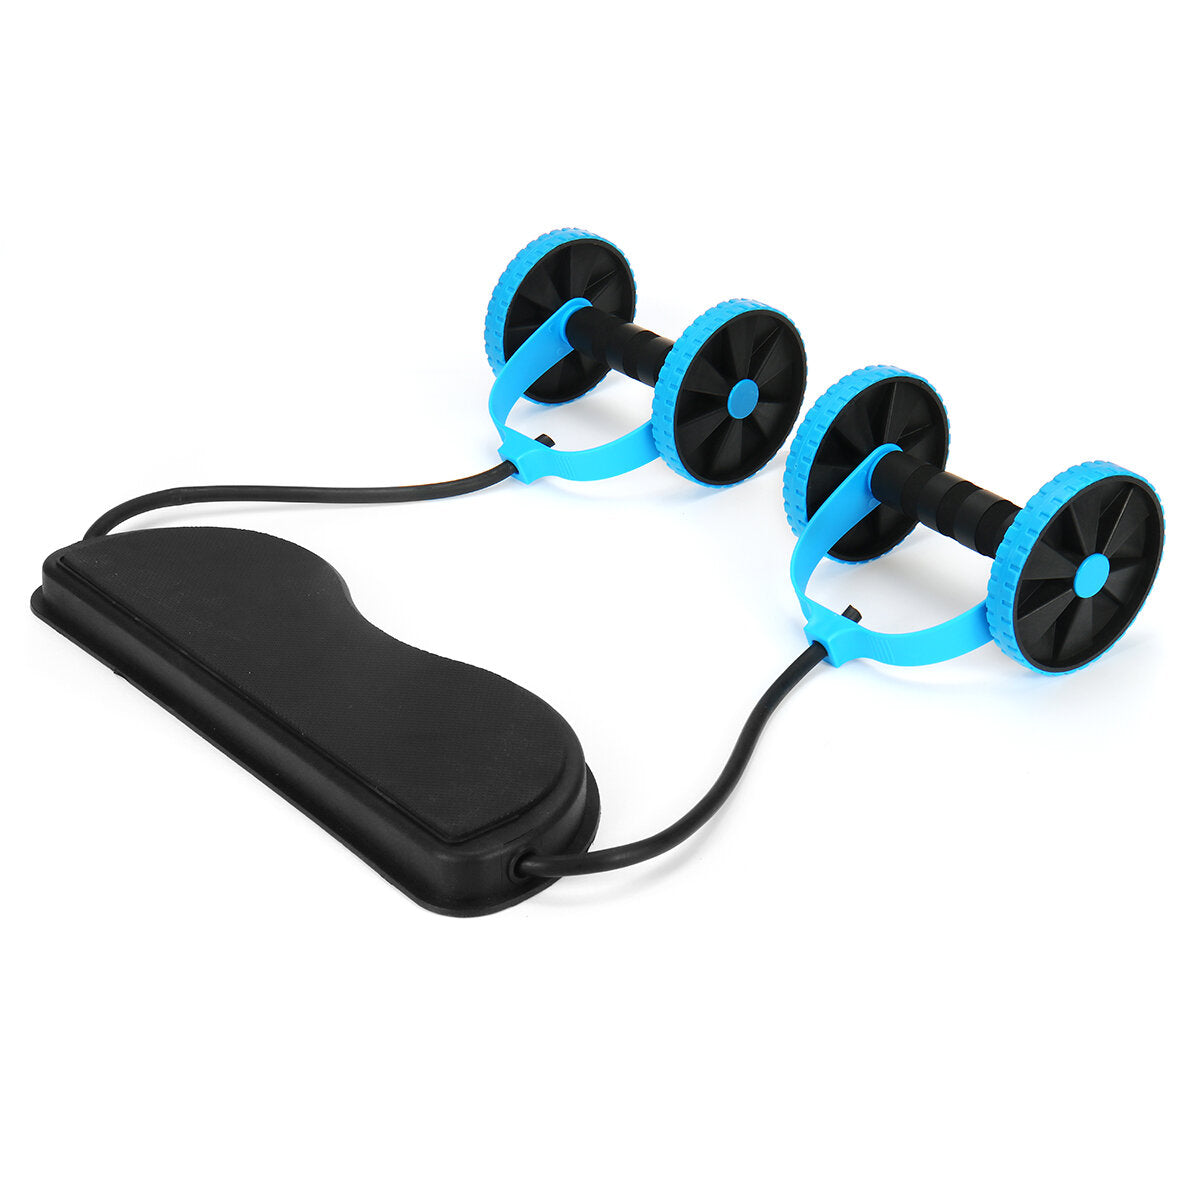 2 In 1 Abdominal Wheel Roller Resistance Bands Fitness Muscle Training Double Wheel Strength Exercise Tools